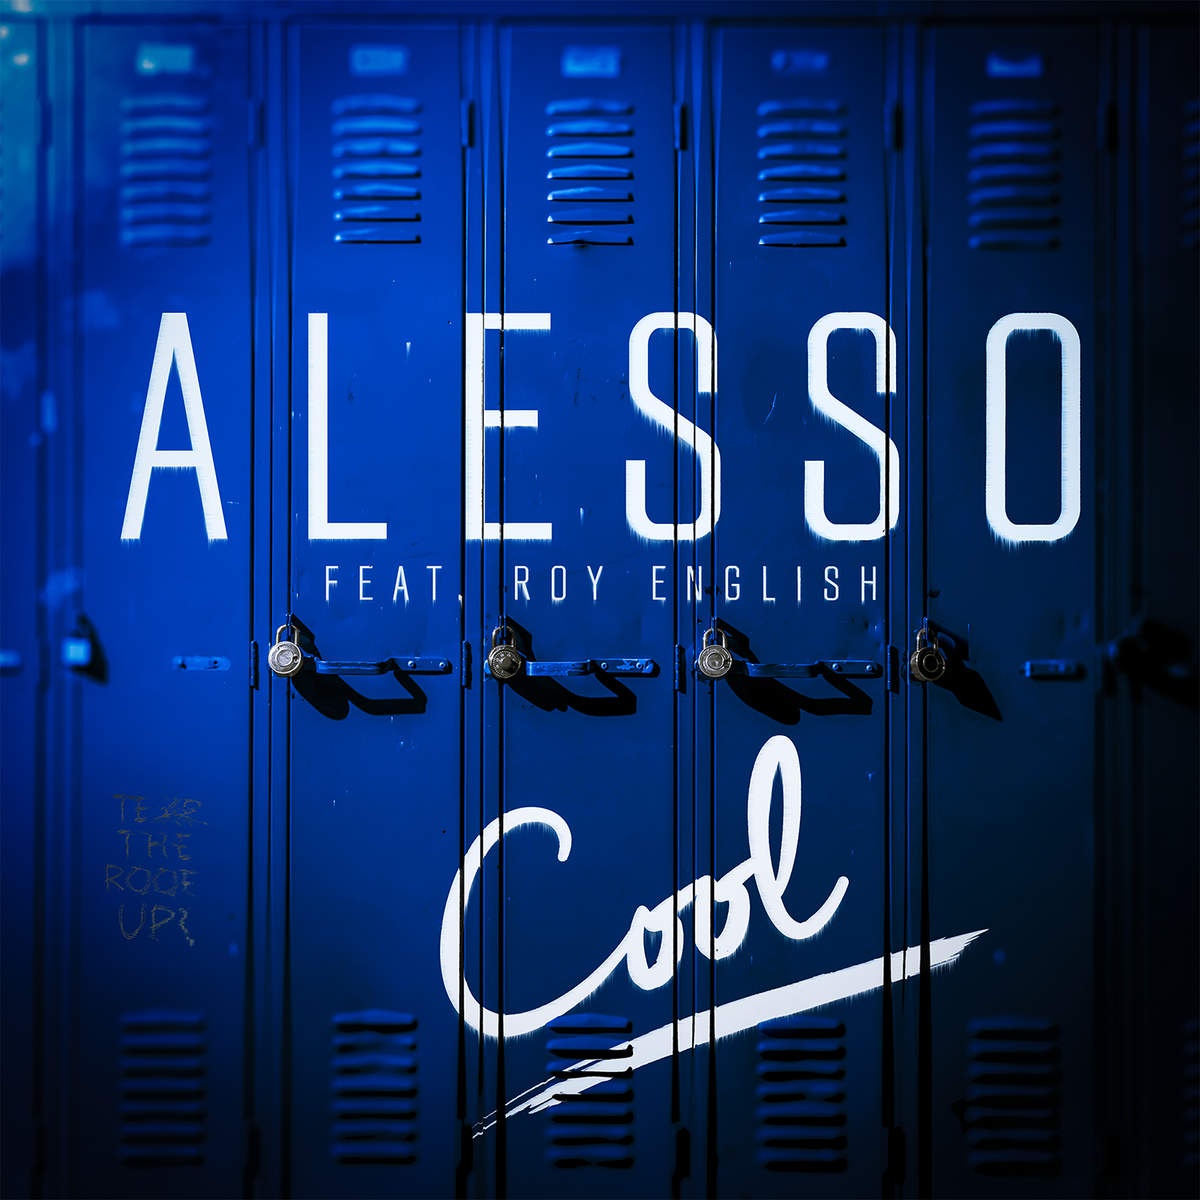 Cool (feat. Roy English)